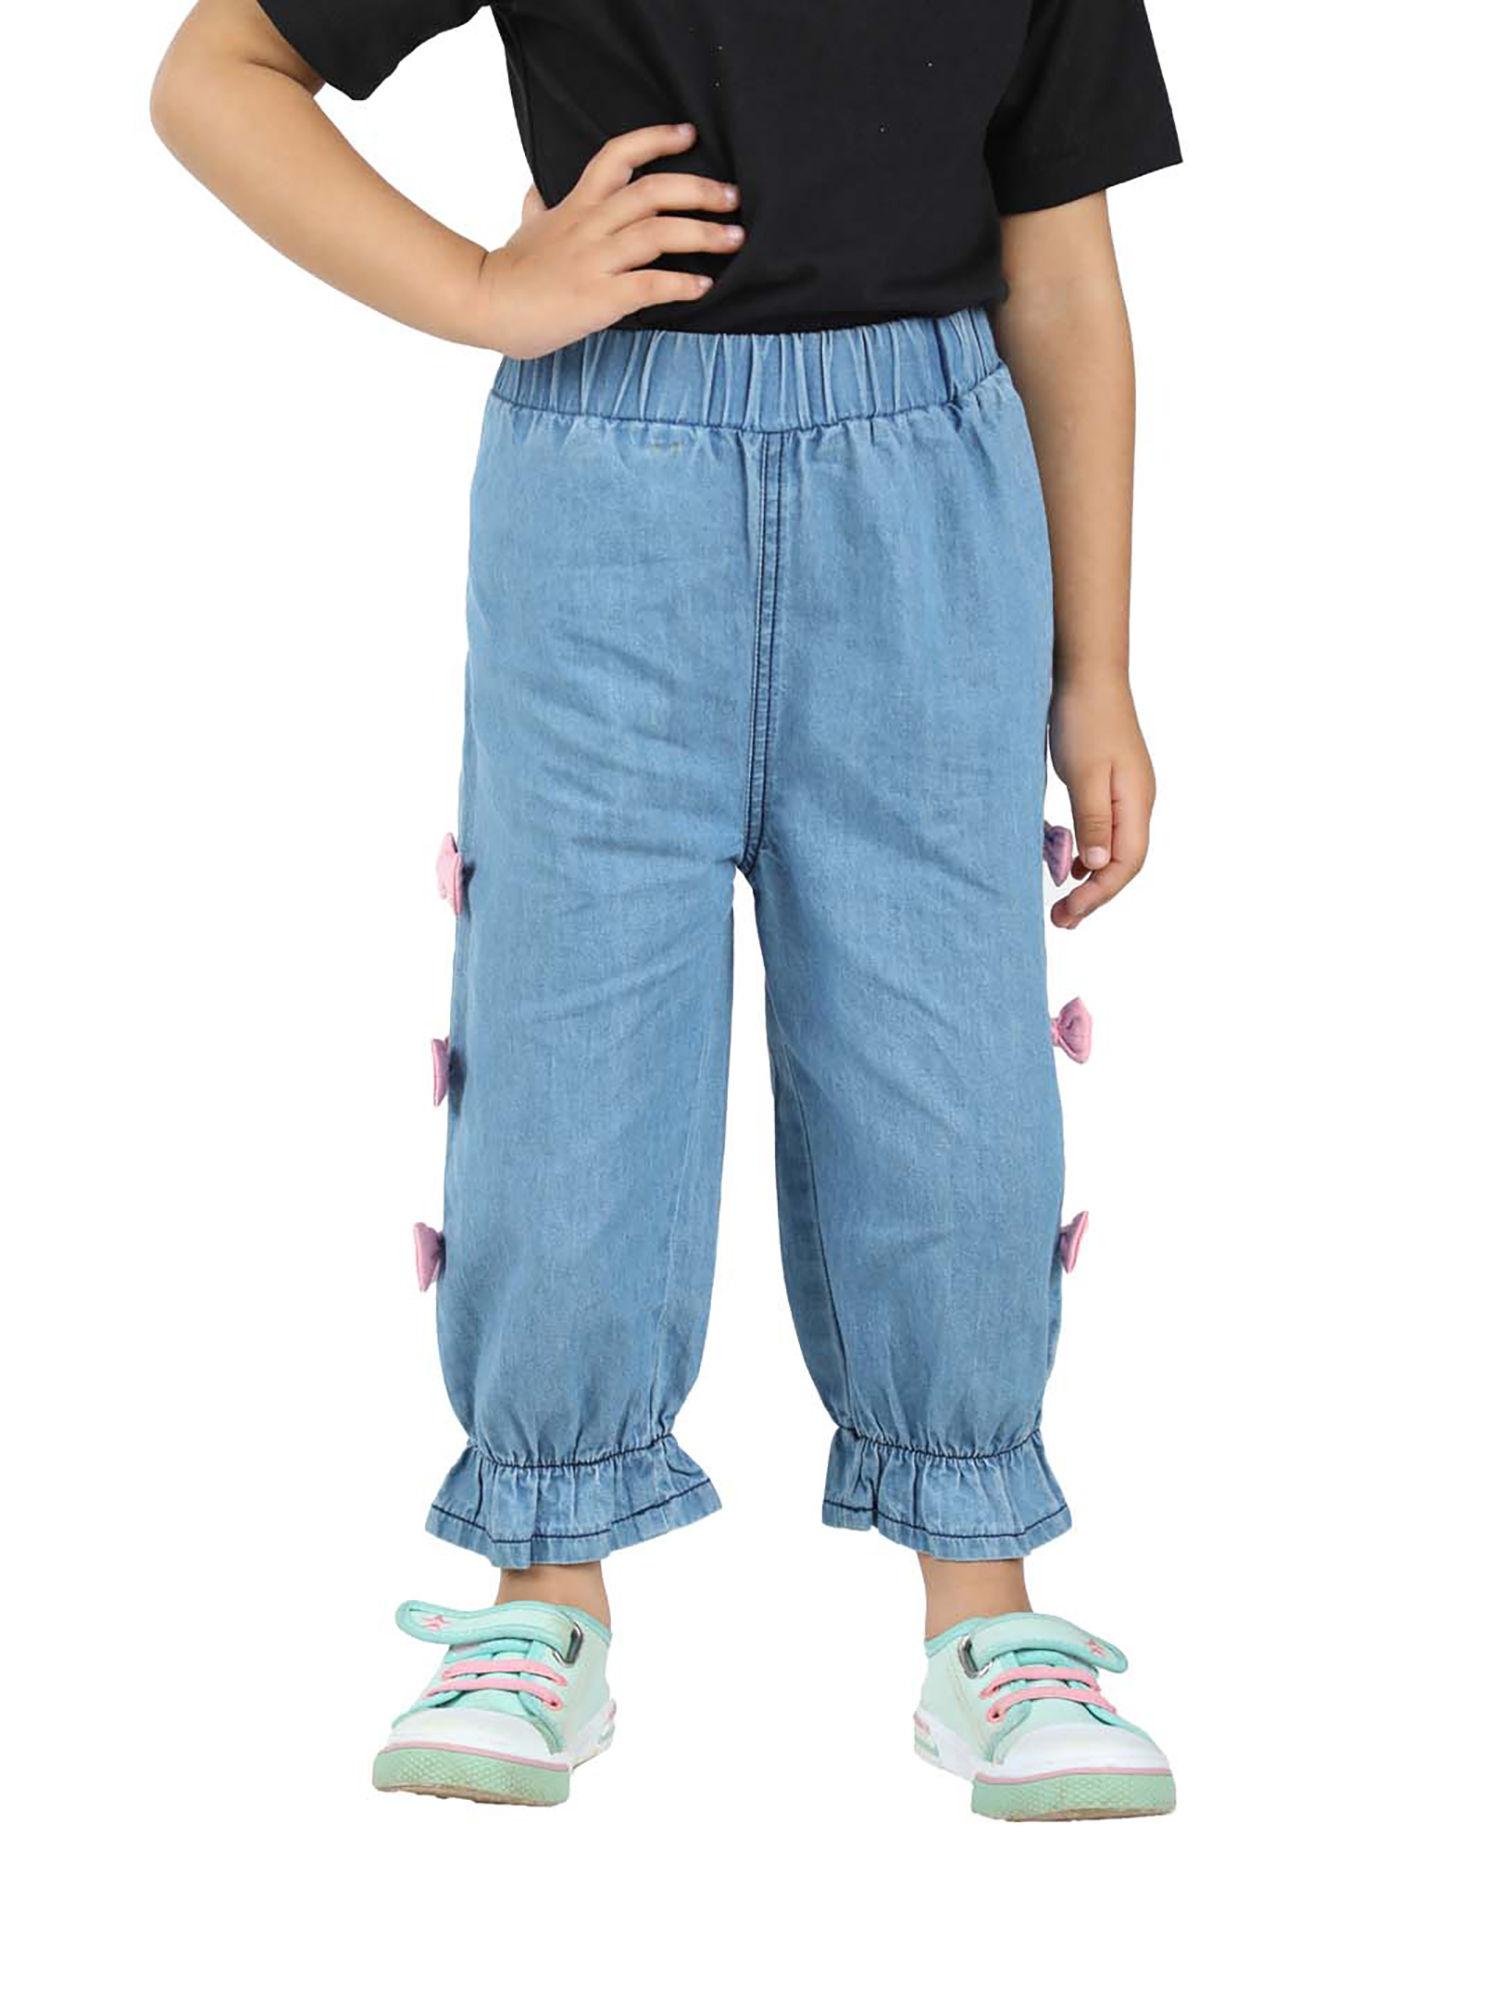 blue denim jeans for girls with attached bow